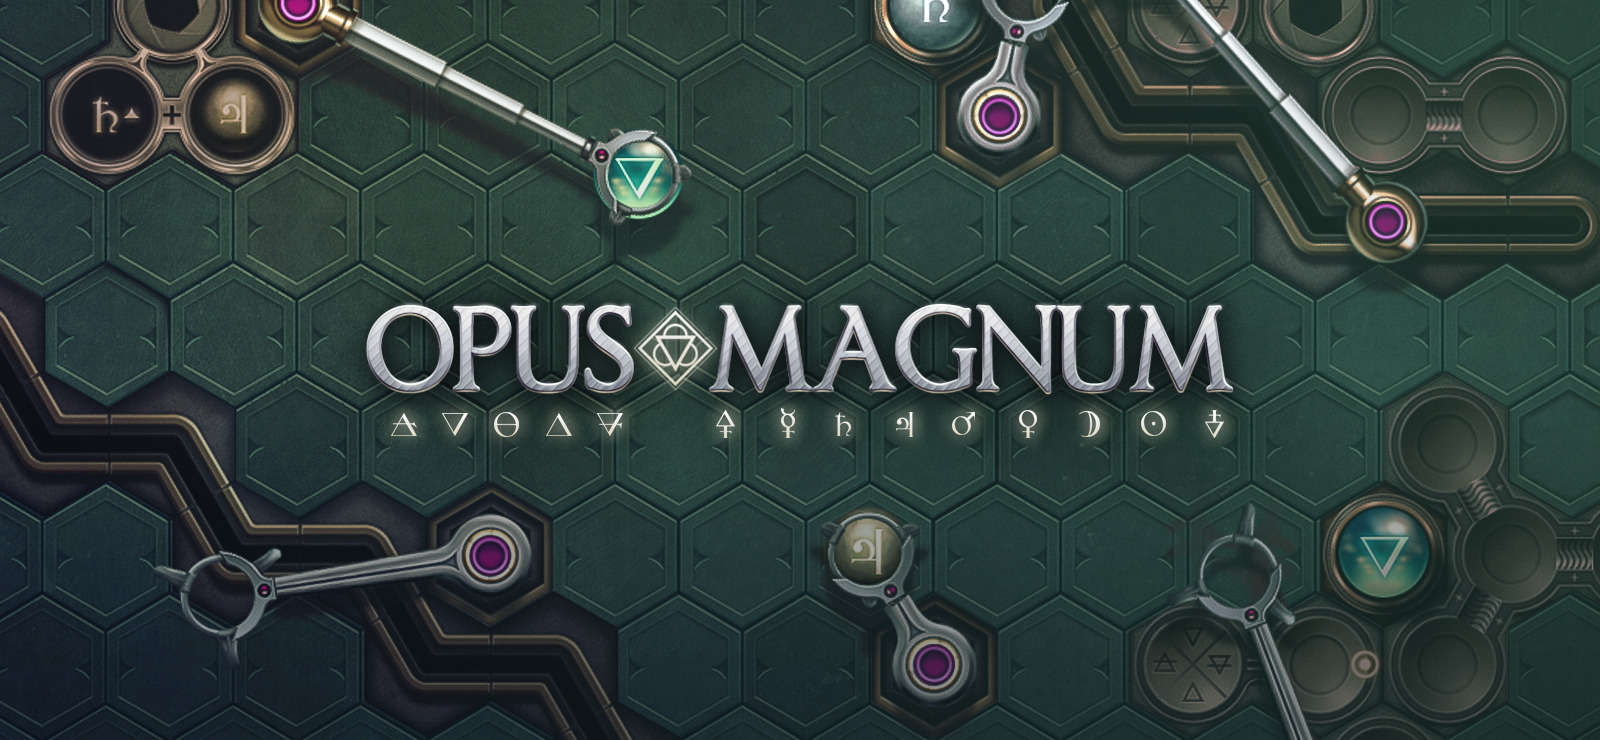 Opus Magnum comes to Game Pass